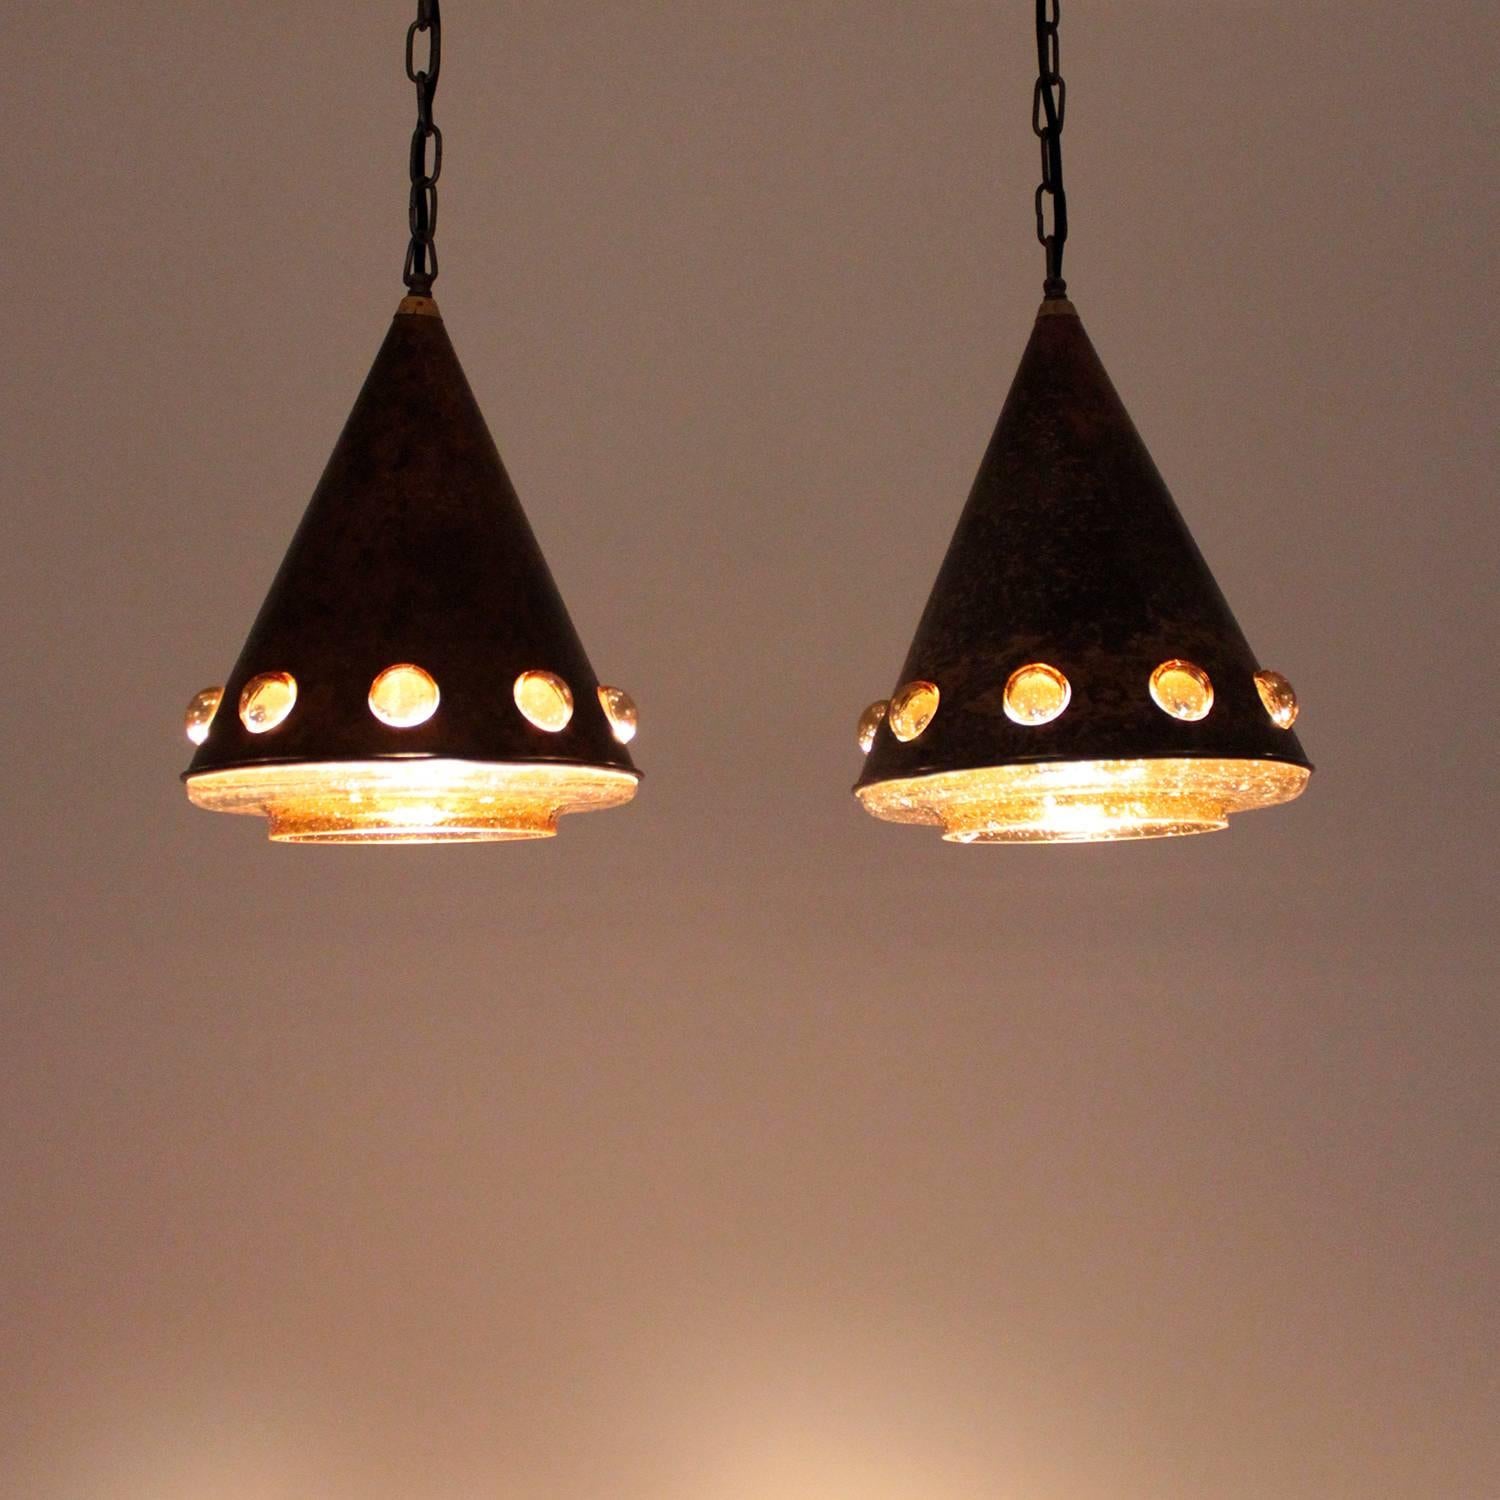 Copper and glass pendant pair by Finish designer Nanny Still-McKinney in the 1960s for the Dutch lighting producer Raak in Amsterdam - fantastic vintage pair in very good condition.

A pair of copper pendants with amber glass and a brass top.